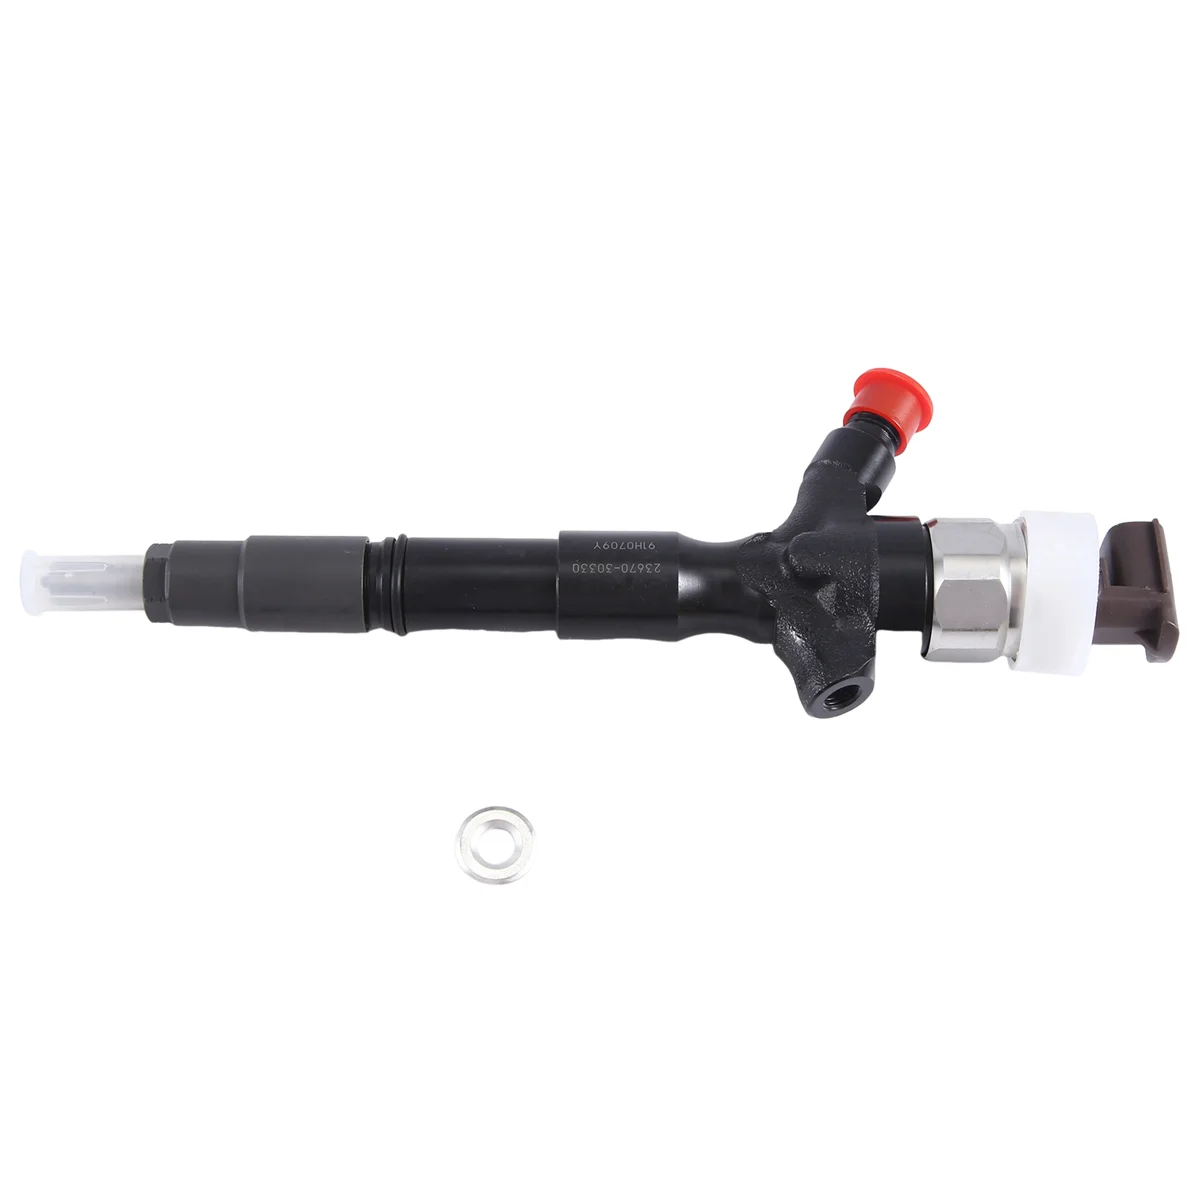 

095000-7830 23670-30330 New Diesel Fuel Injector Nozzle for Toyota Dyna 3.0 D4D 1KD-FTV 3.0 LTR